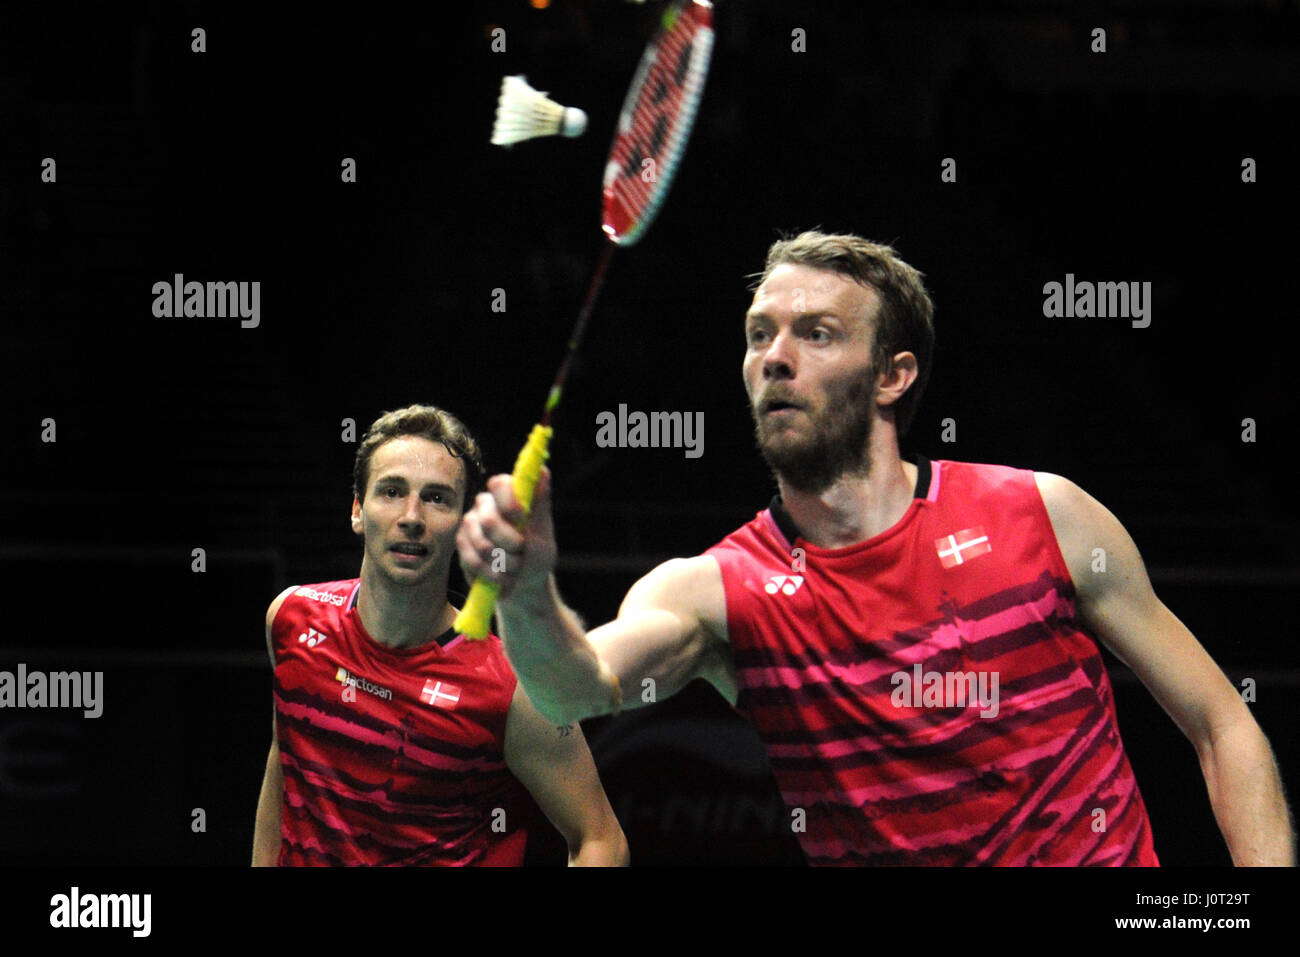 Singapore. 16th Apr, 2017. Denmark's Mathias Boe and Carsten Mogensen (R)  compete during the men's doubles final match against China's Li Junhui and  Liu Yuchen at the OUE Singapore Open in Singapore,